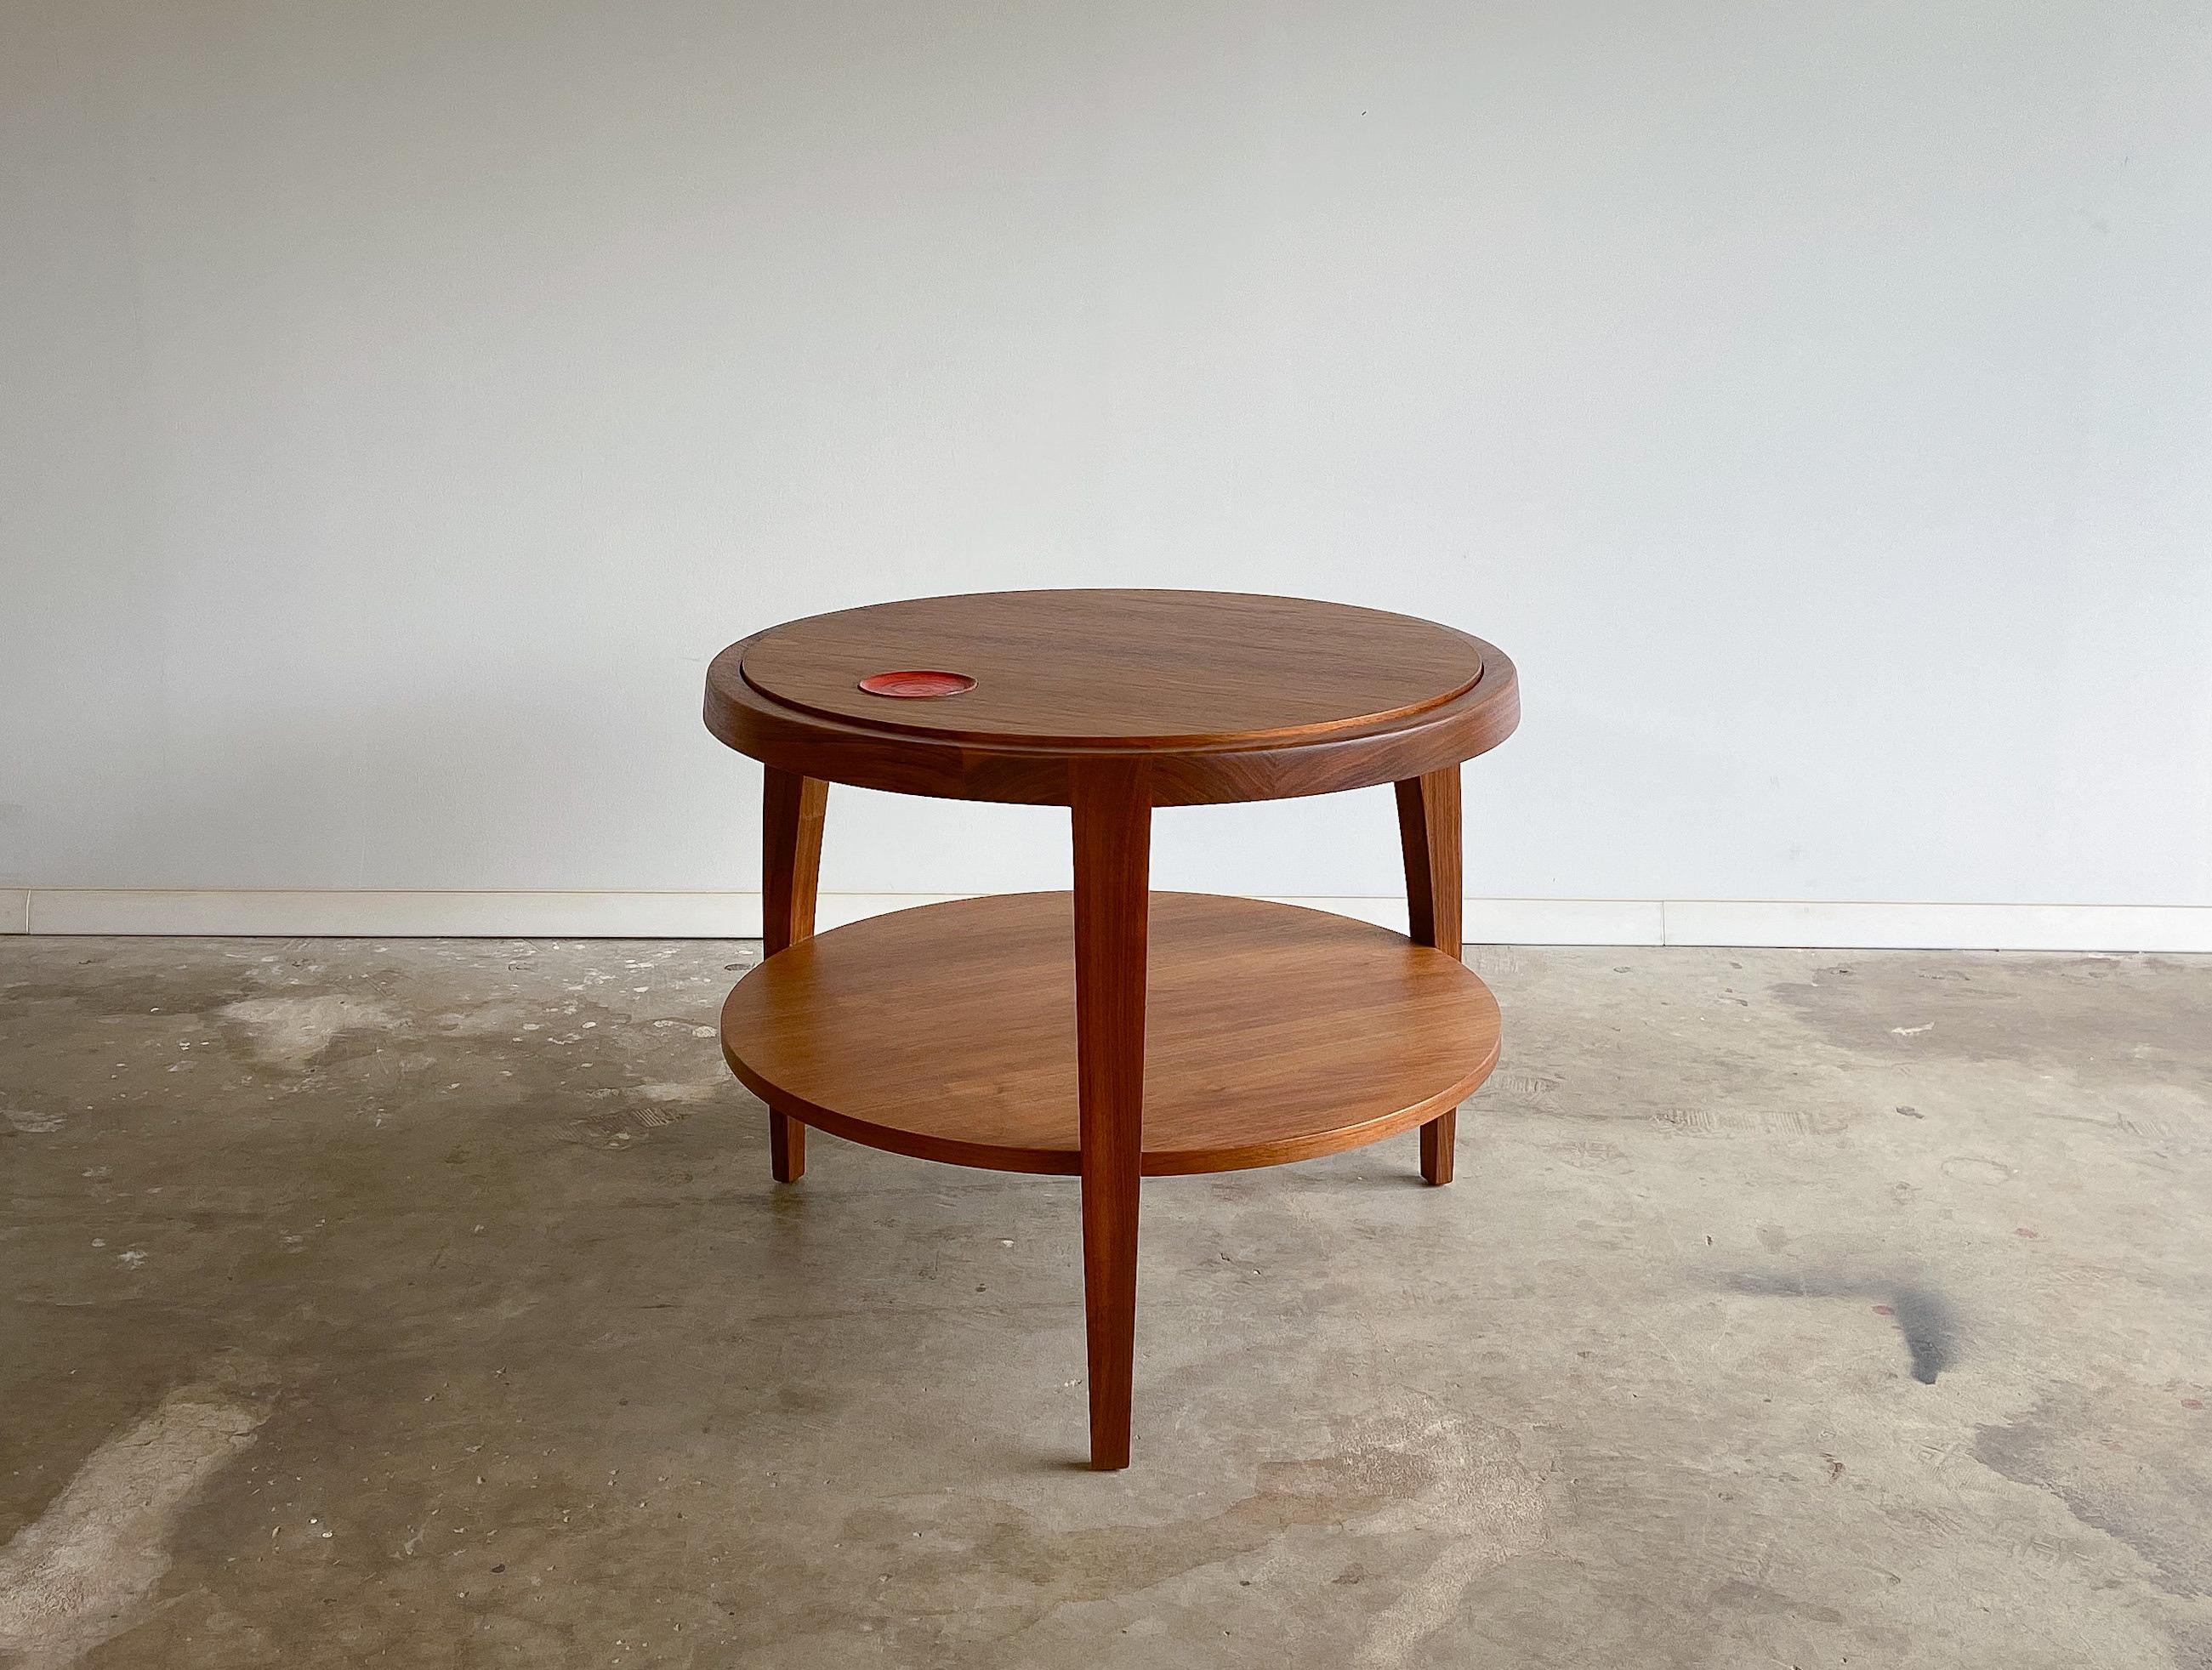 Offered is a rare occasional table designed by Edward Wormley for Dunbar. Model no. 319 is made from beautifully grained solid walnut, featuring a lovely inset ceramic tile by famed ceramicists Otto and Gertrud Natzler.

The Natzler tile